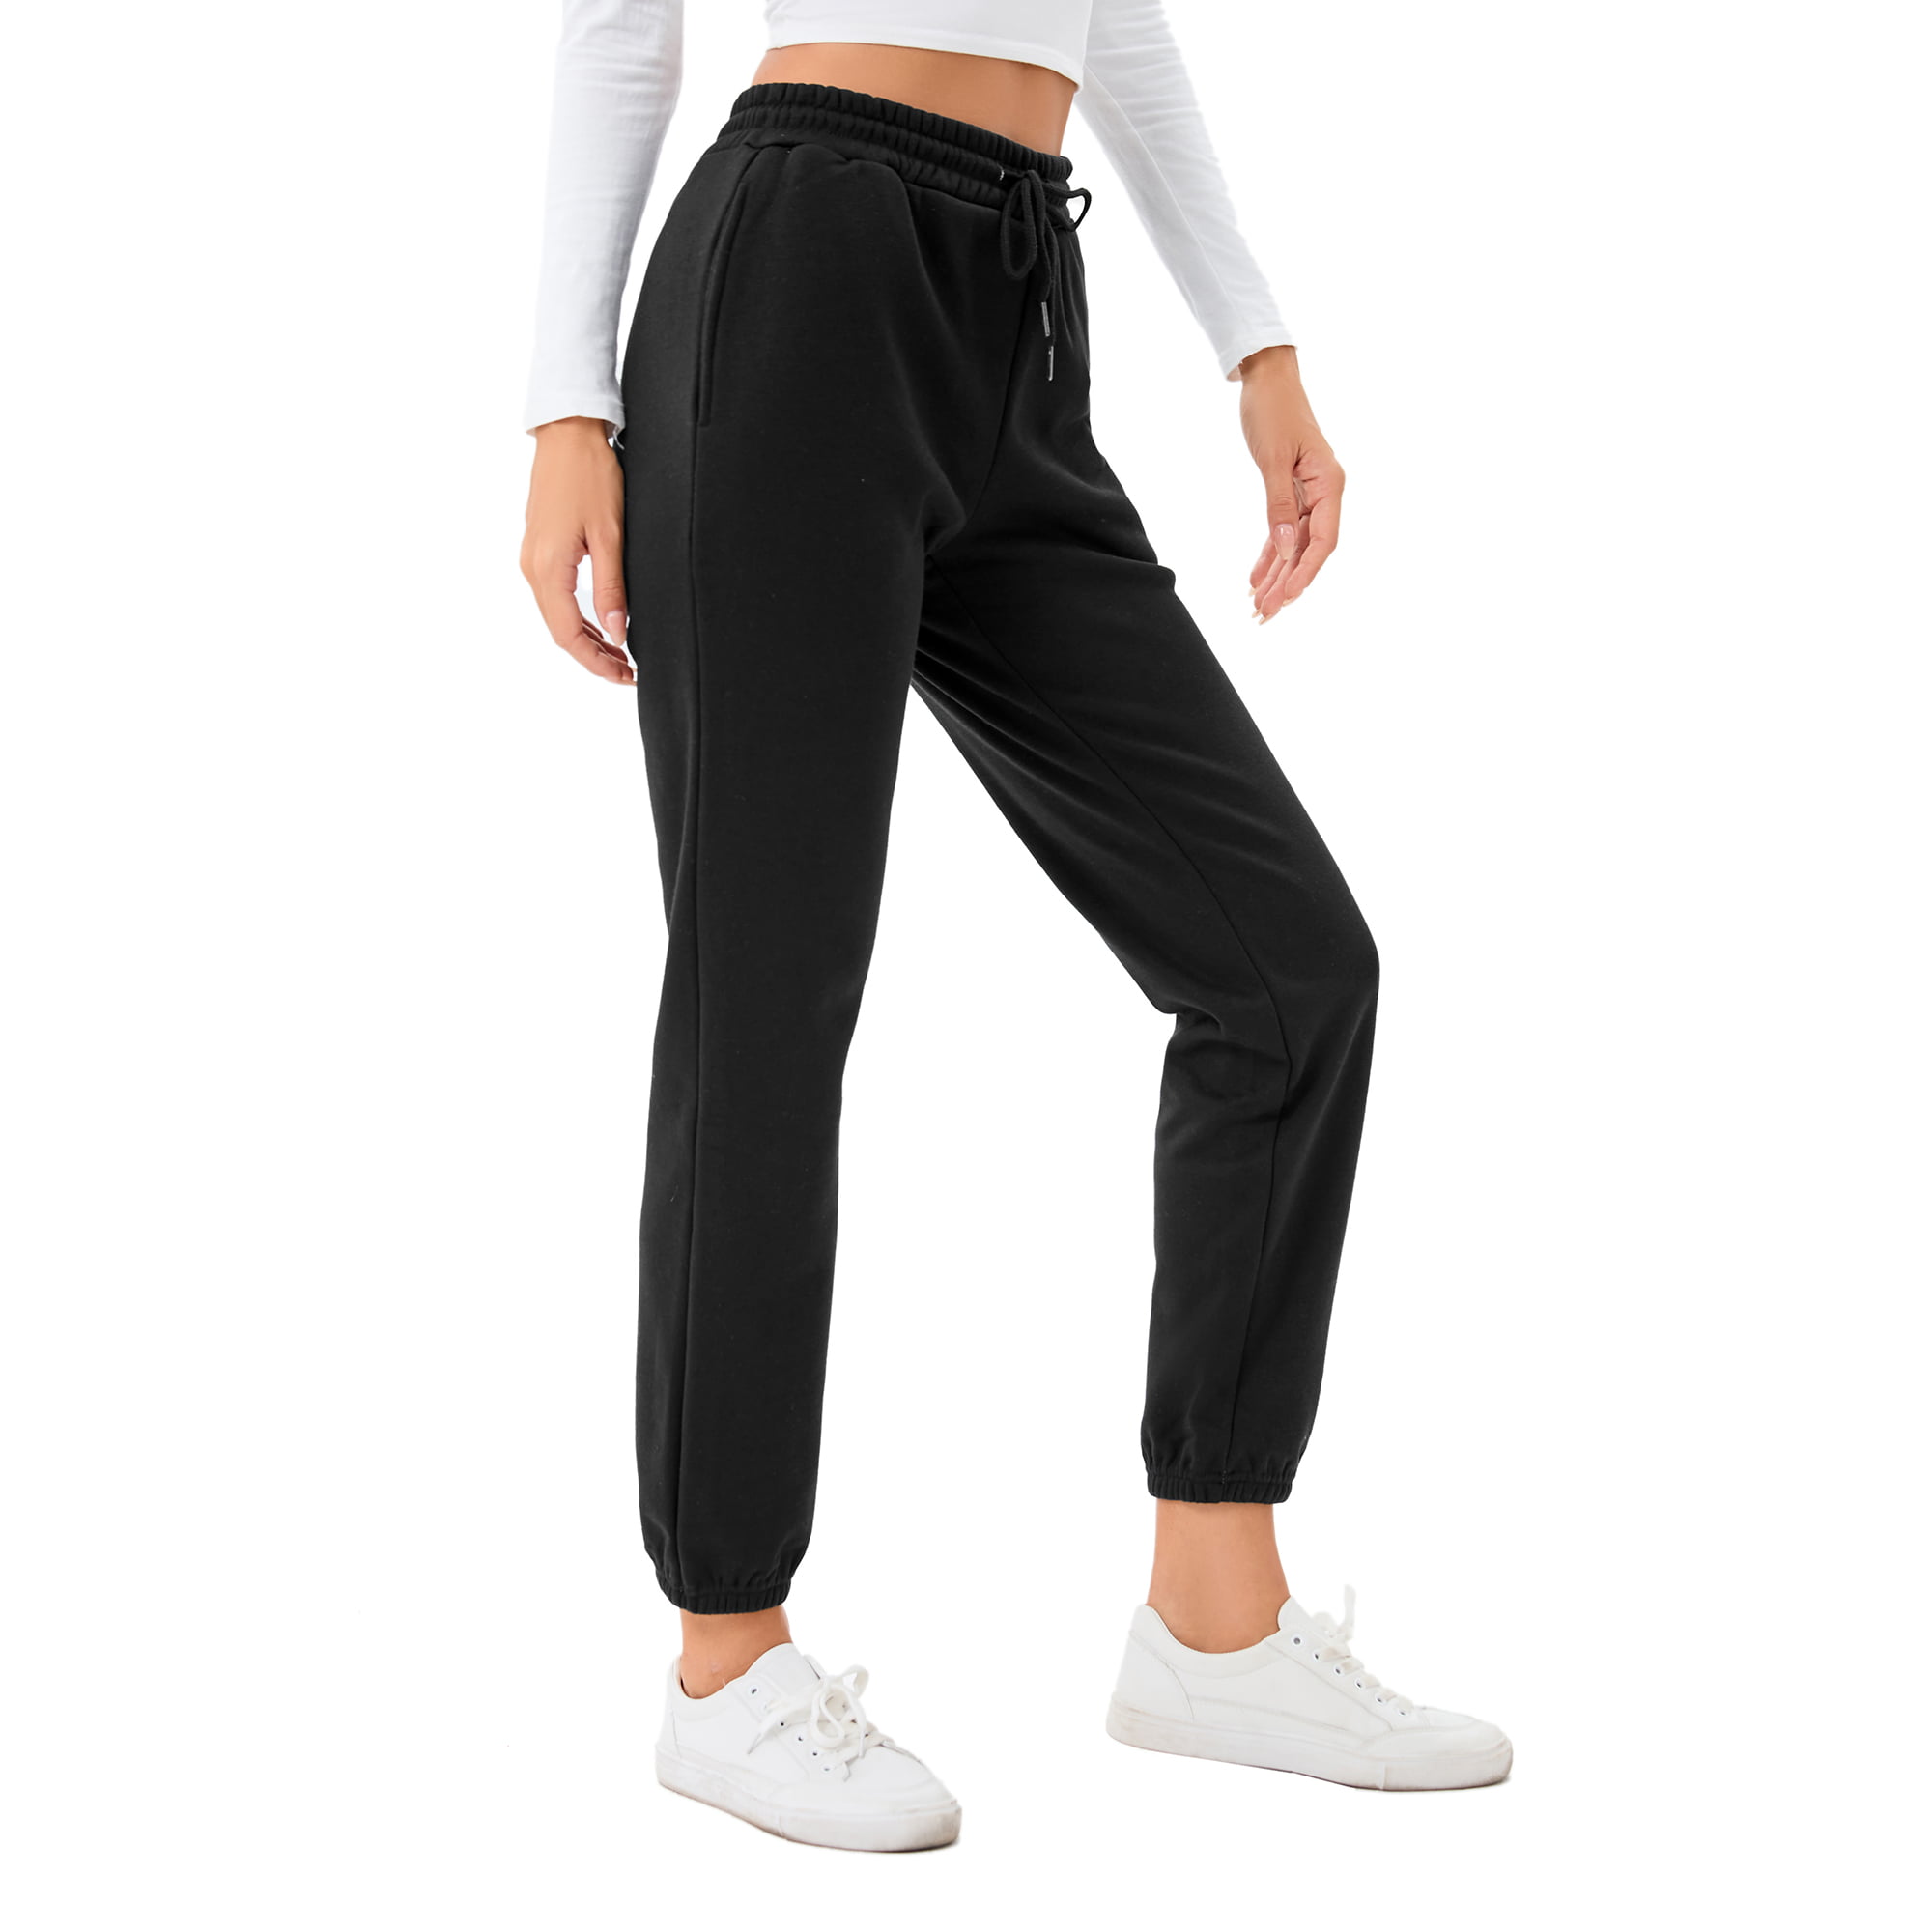 Women Winter Thermal Workout Yoga Pants with Pockets Fleece Lined Leggings